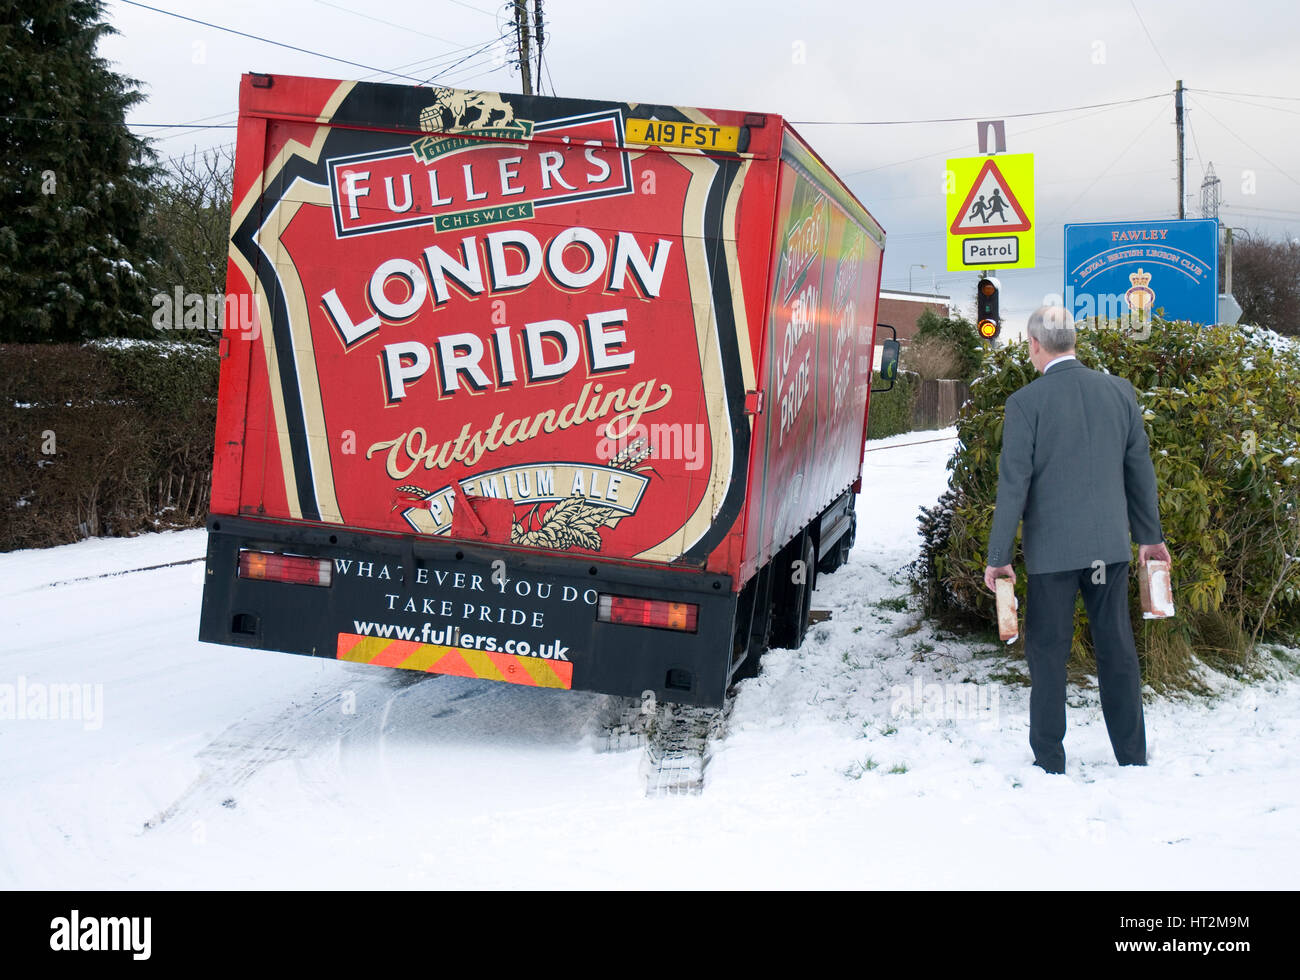 London Pride Brewery lorry stuck in snow 2009 Artist: Unknown. Stock Photo